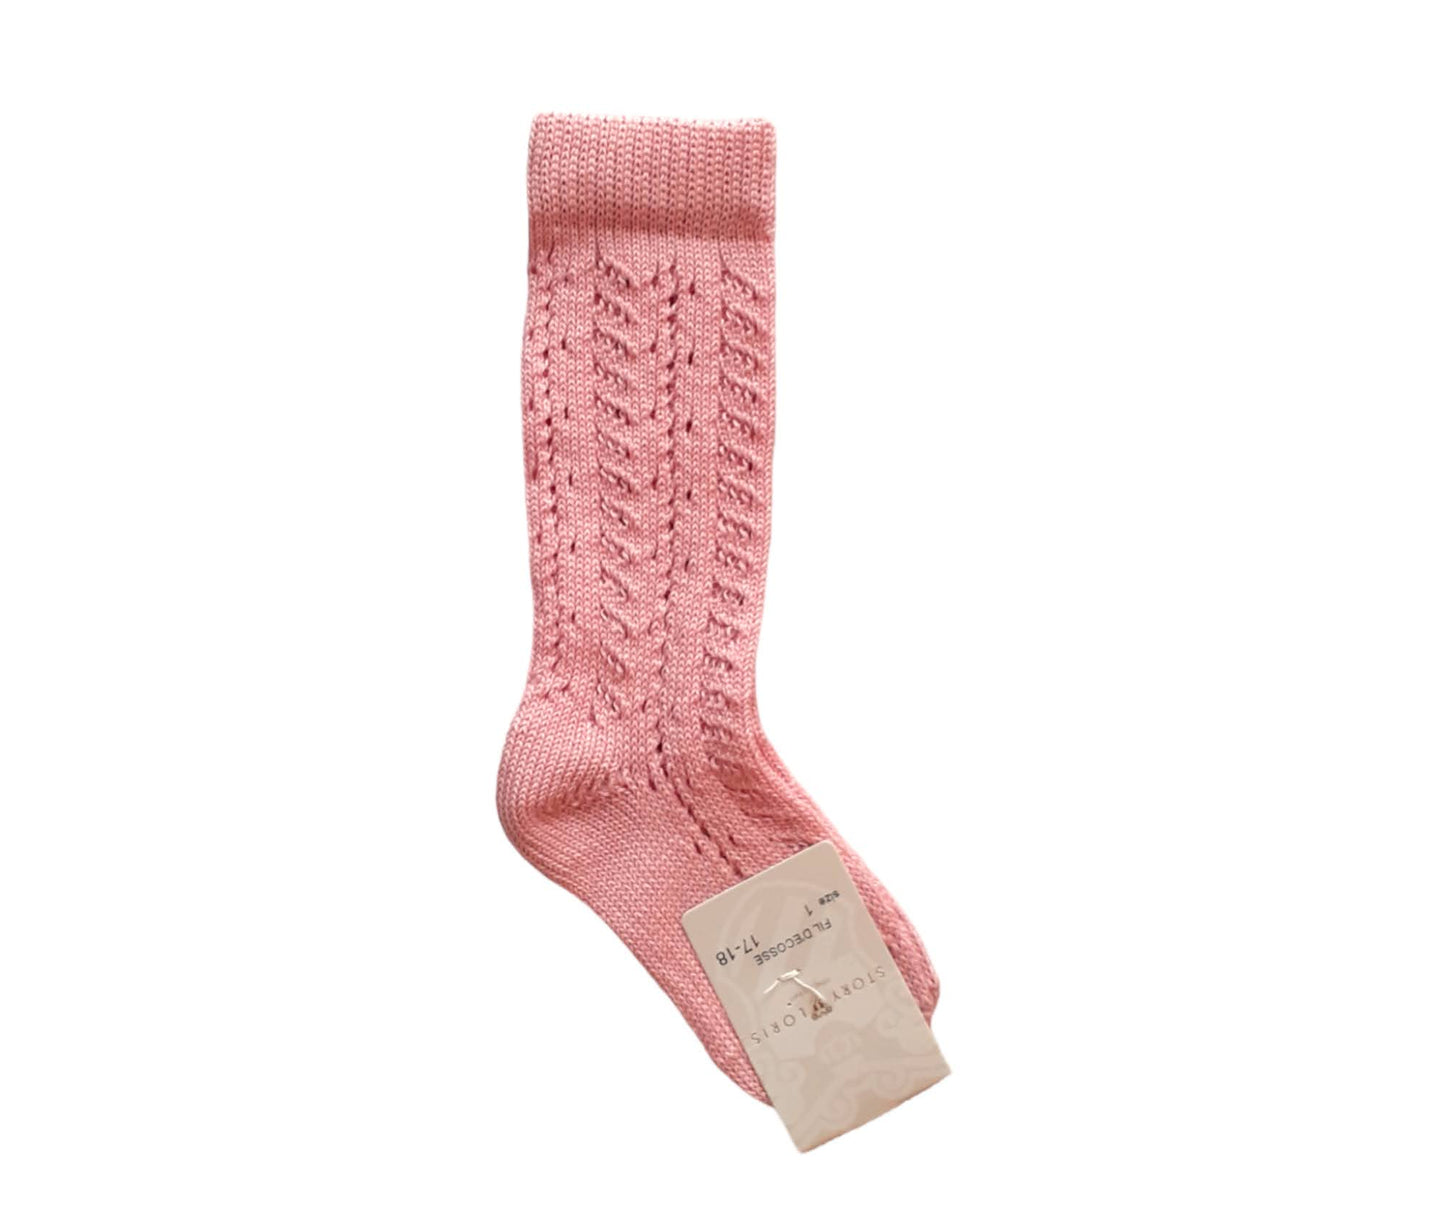 STORY LORIS Long Socks in Antique Pink Perforated Cotton Thread